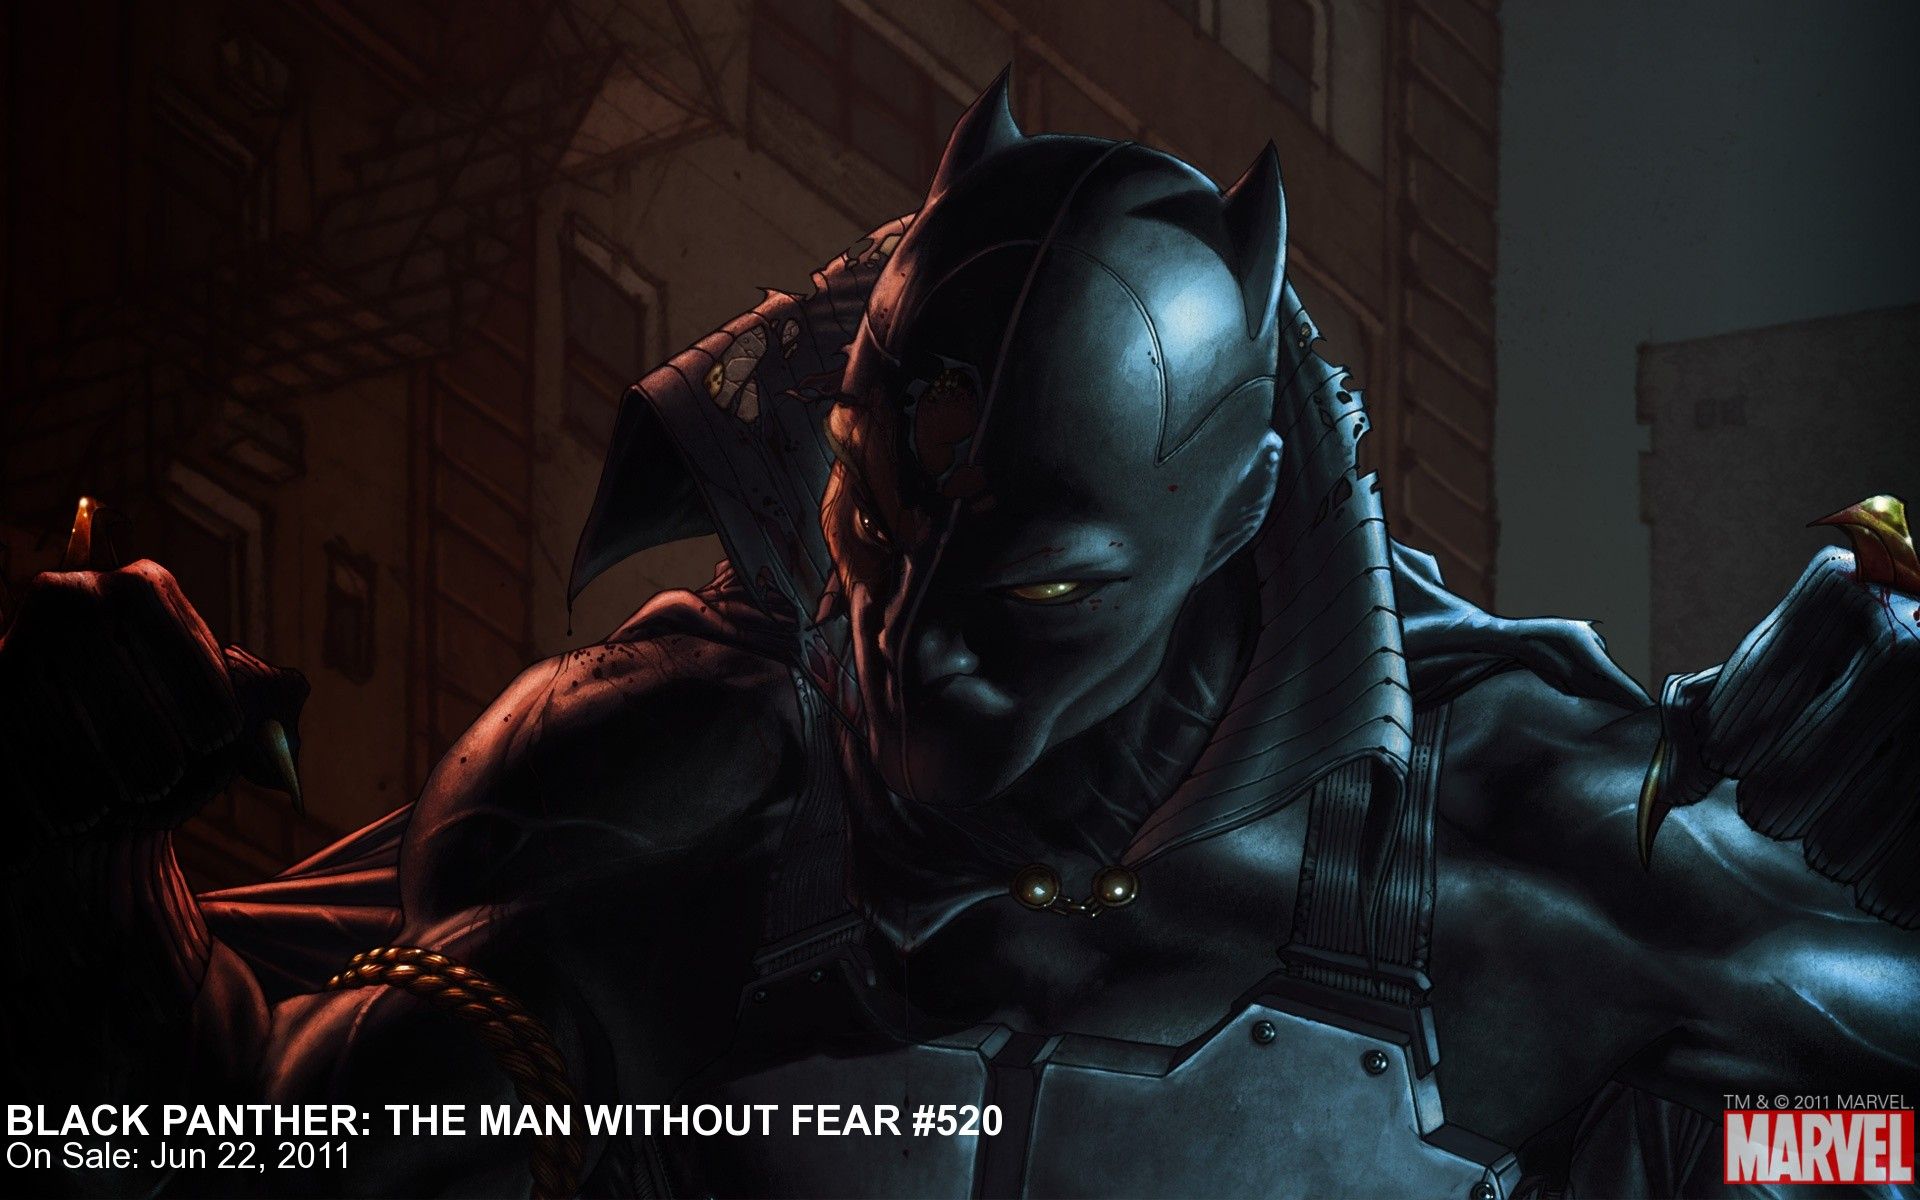 Black Panther: Man Without Fear #520 Wallpaper | Apps | Marvel.com